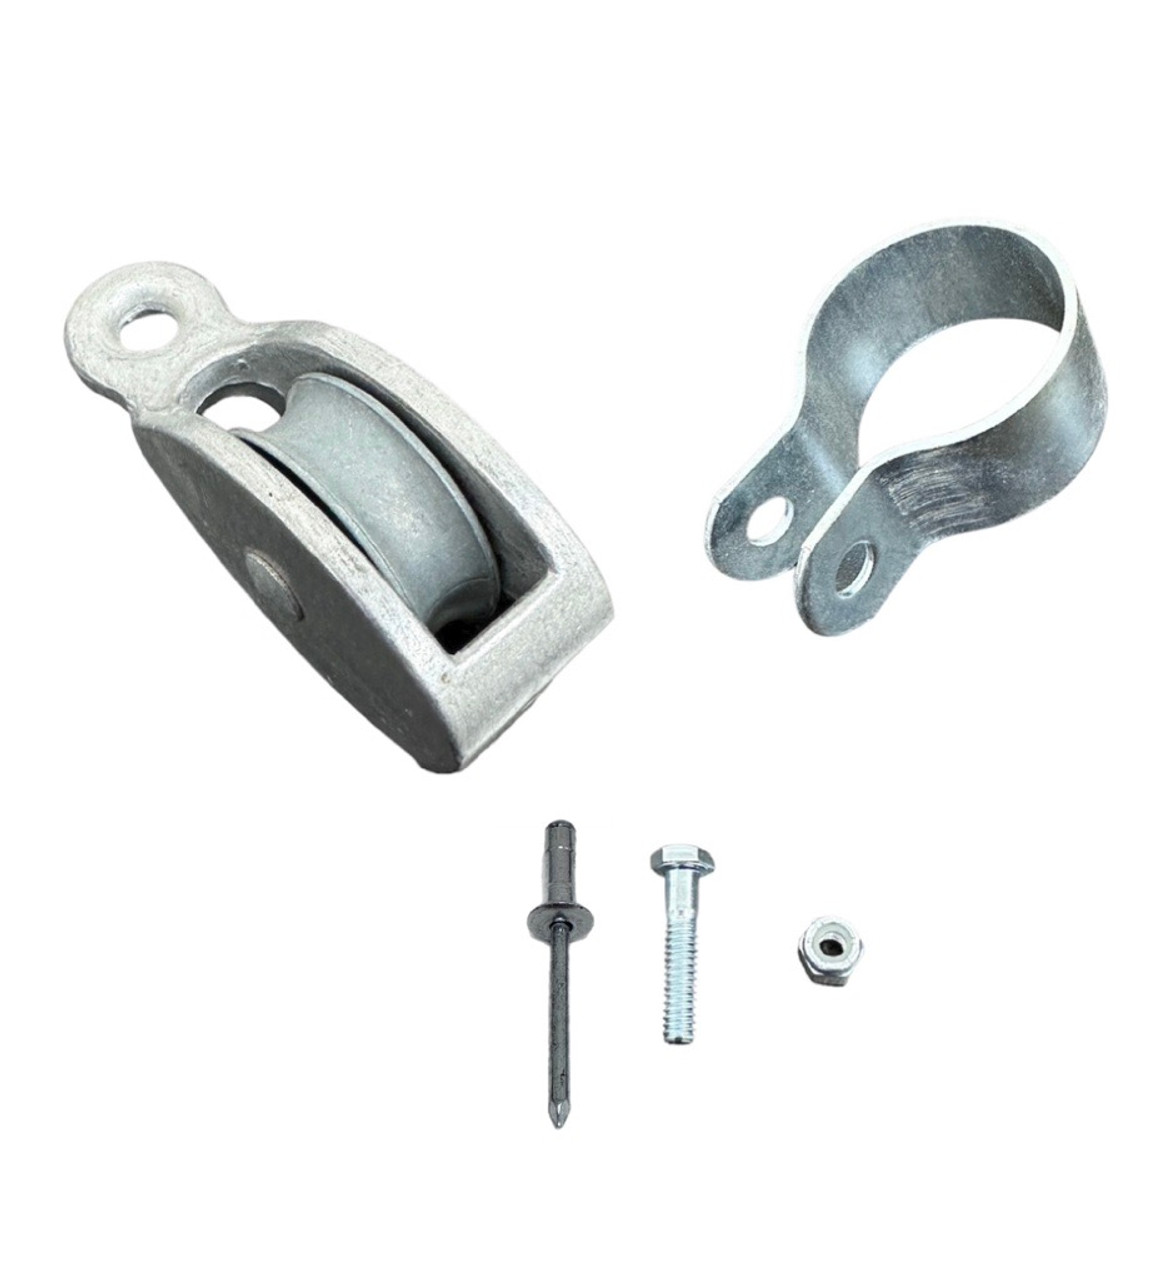 LadderProducts.com | Universal Round Rung Extension Ladder Bracket and Pulley Kit